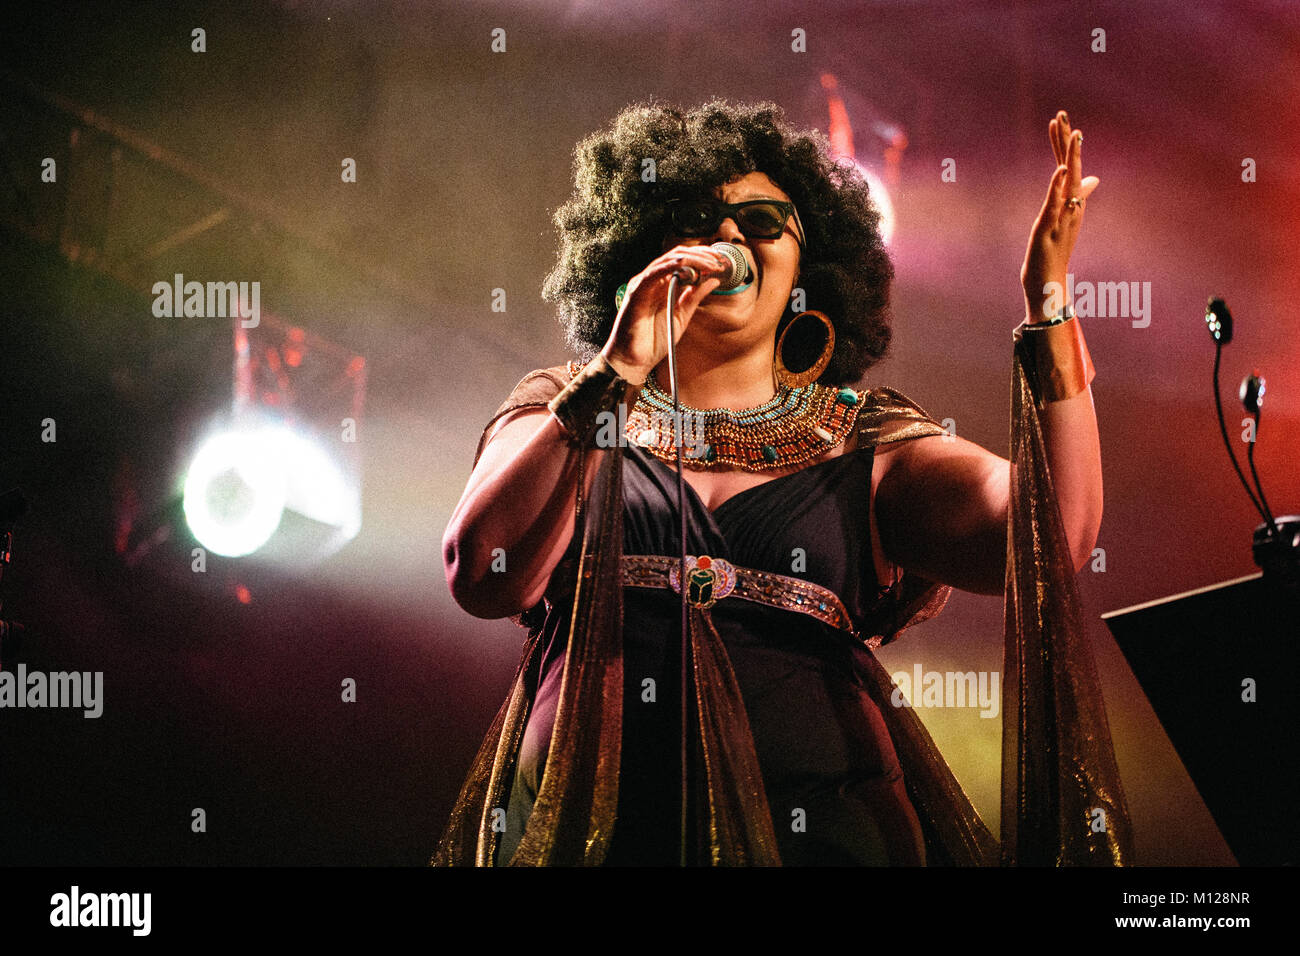 The American avant-garde jazz group Sun Ra Arkestra performs a live concert at the Polish music festival Off Festival 2015 in Katowice. Here vocalist Tara Middleton is pictured live on stage. Poland, 08/08 2015. Stock Photo